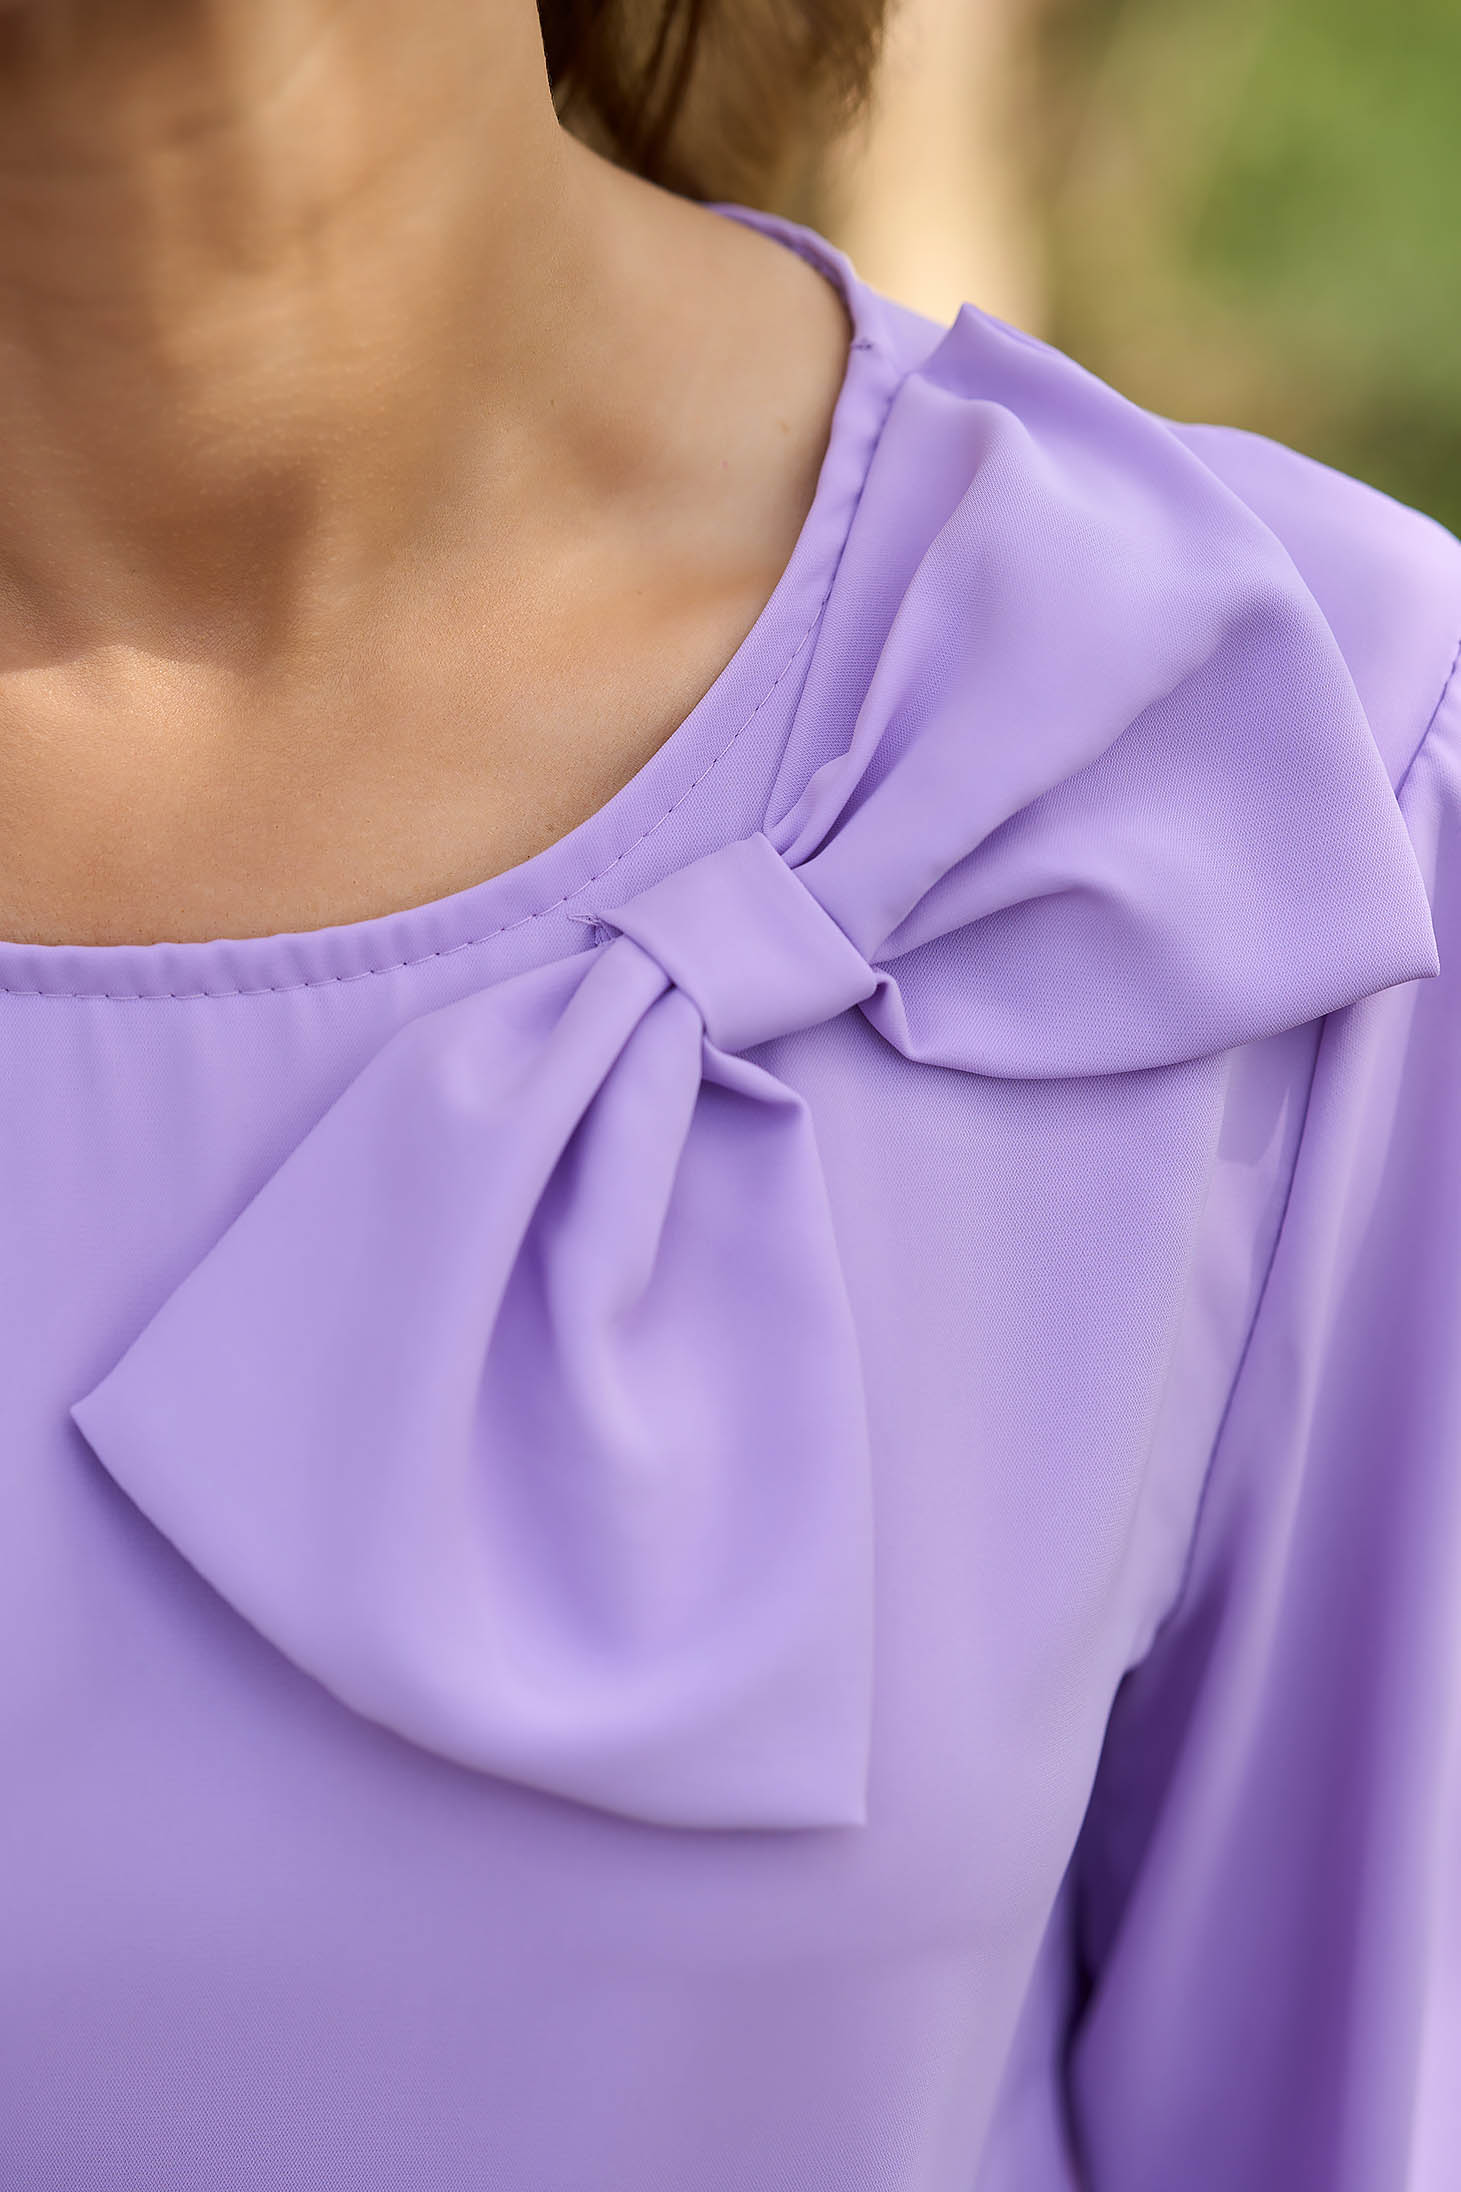 Ladies' blouse made of thin lilac material with a wide cut accessorized with a bow - SunShine 5 - StarShinerS.com